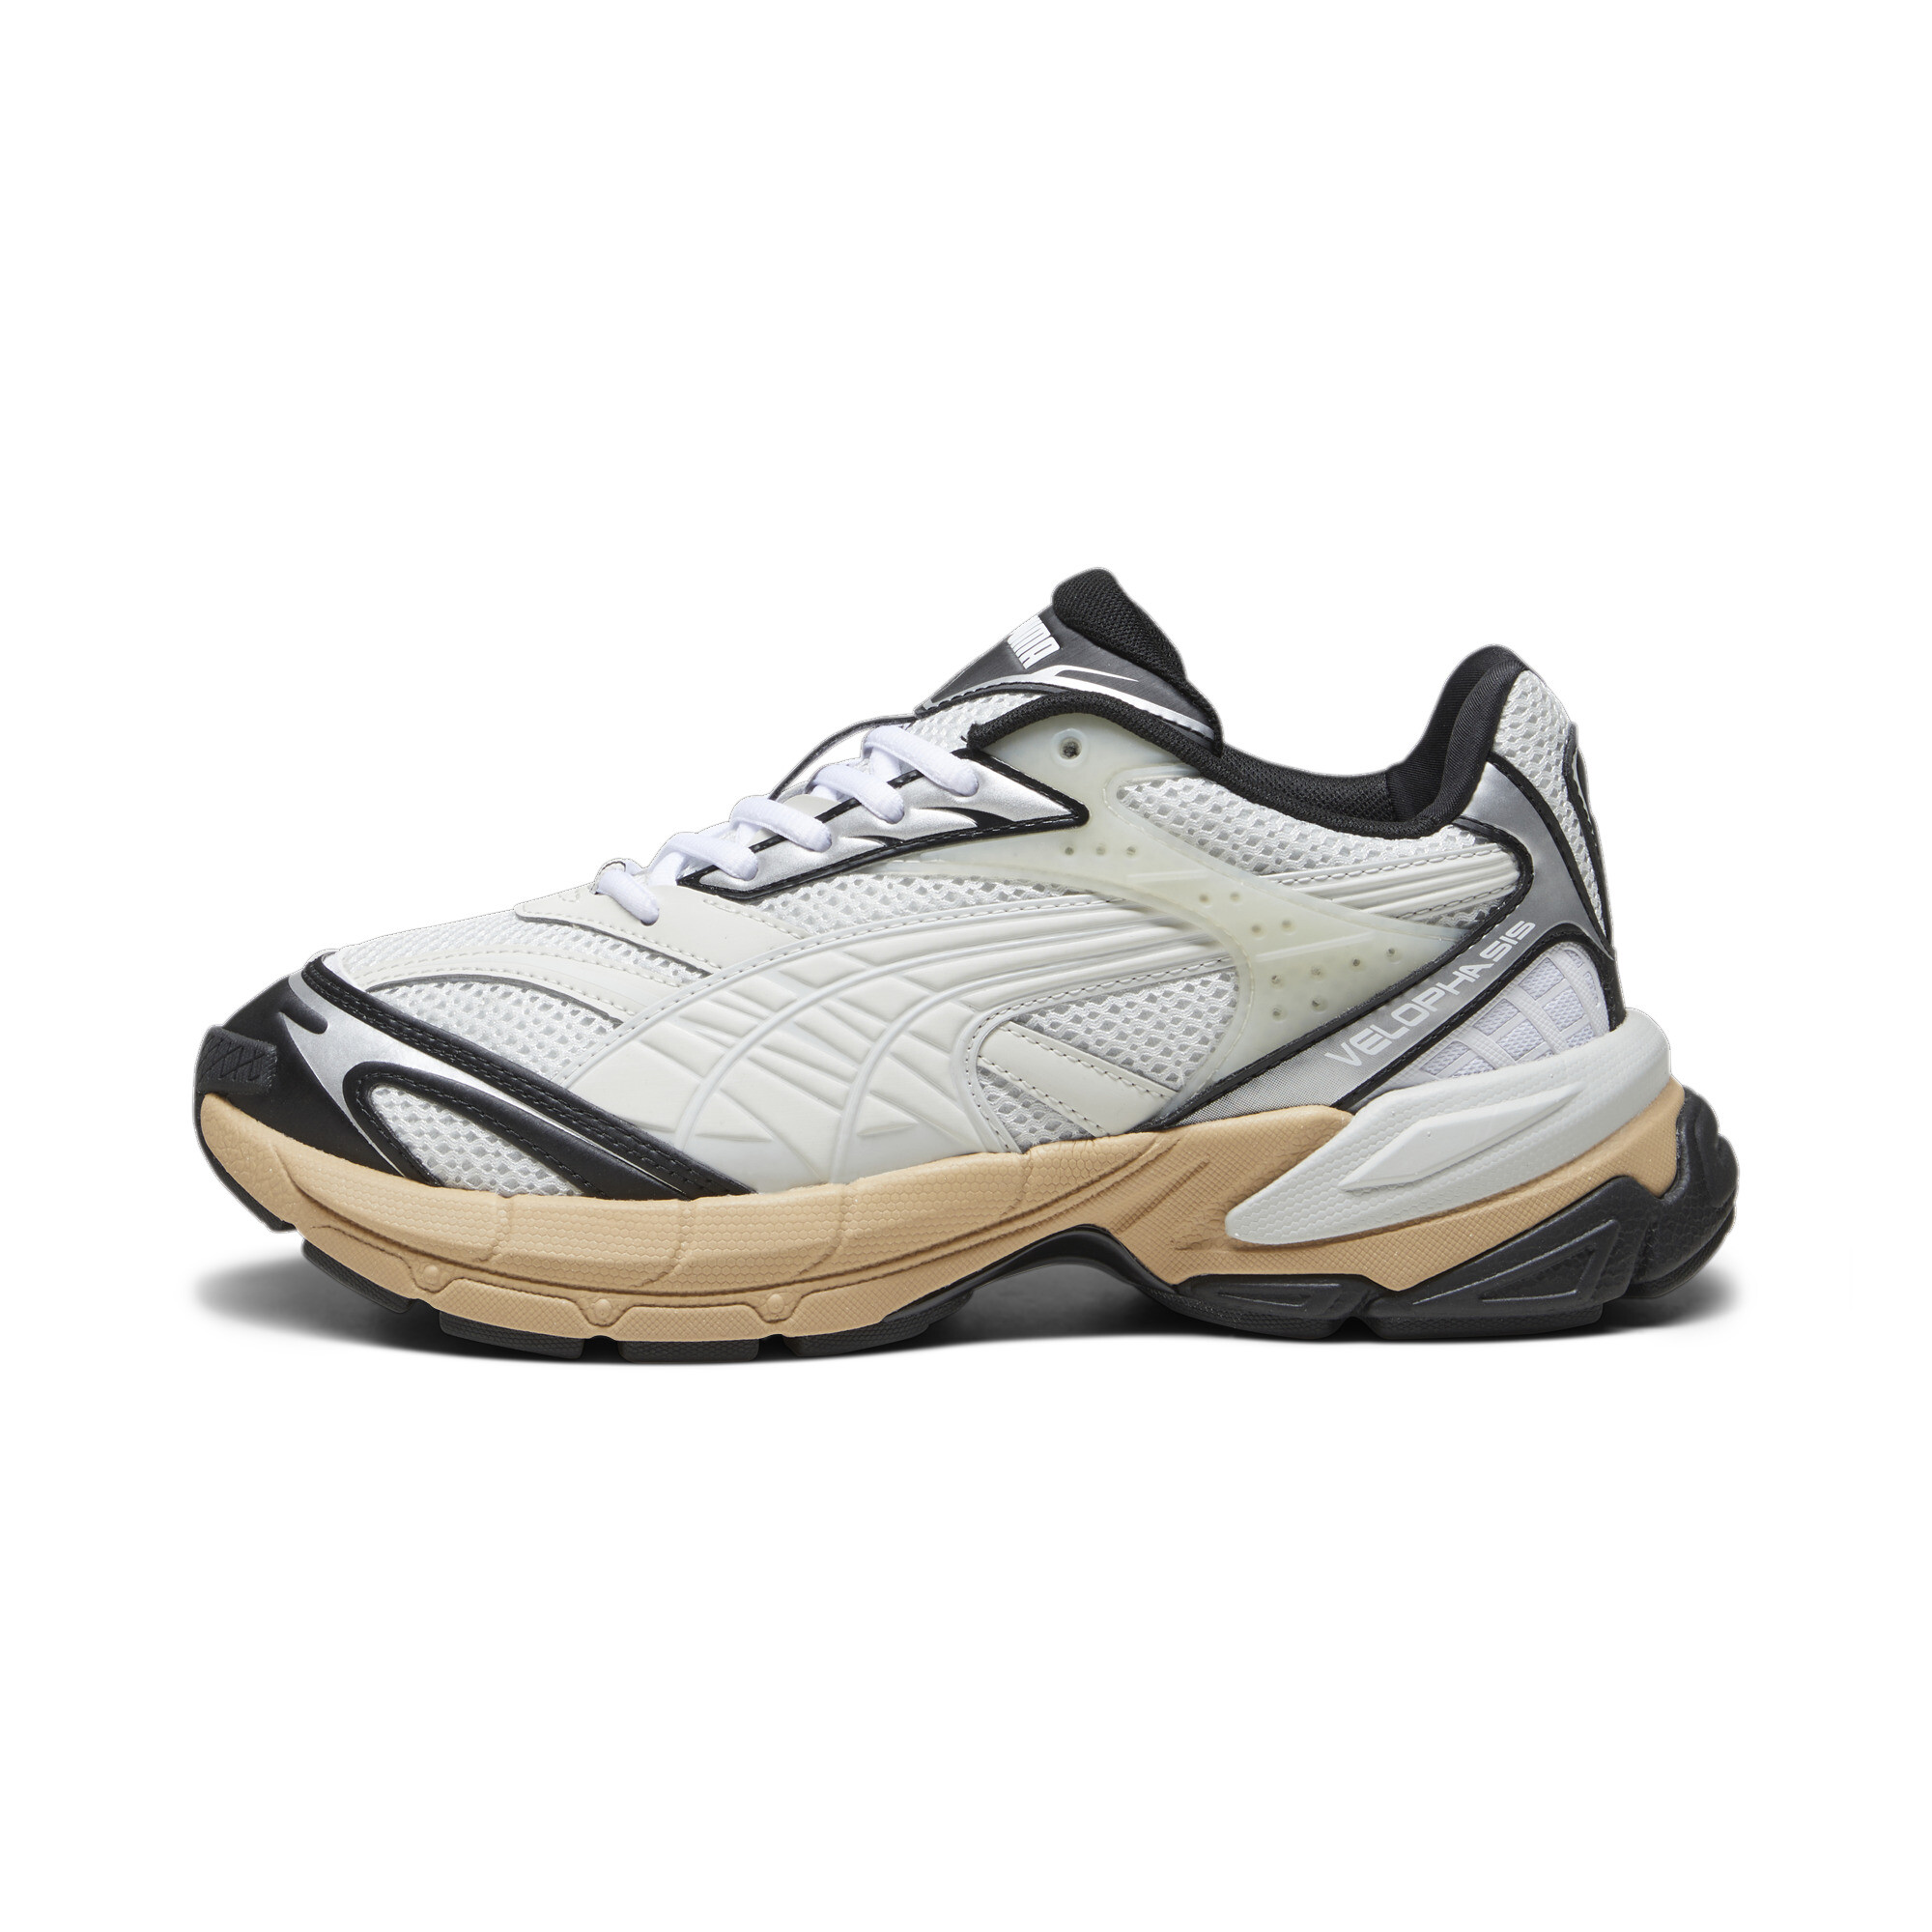 Puma Velophasis Technisch Sneakers, Gray, Size 46, Shoes